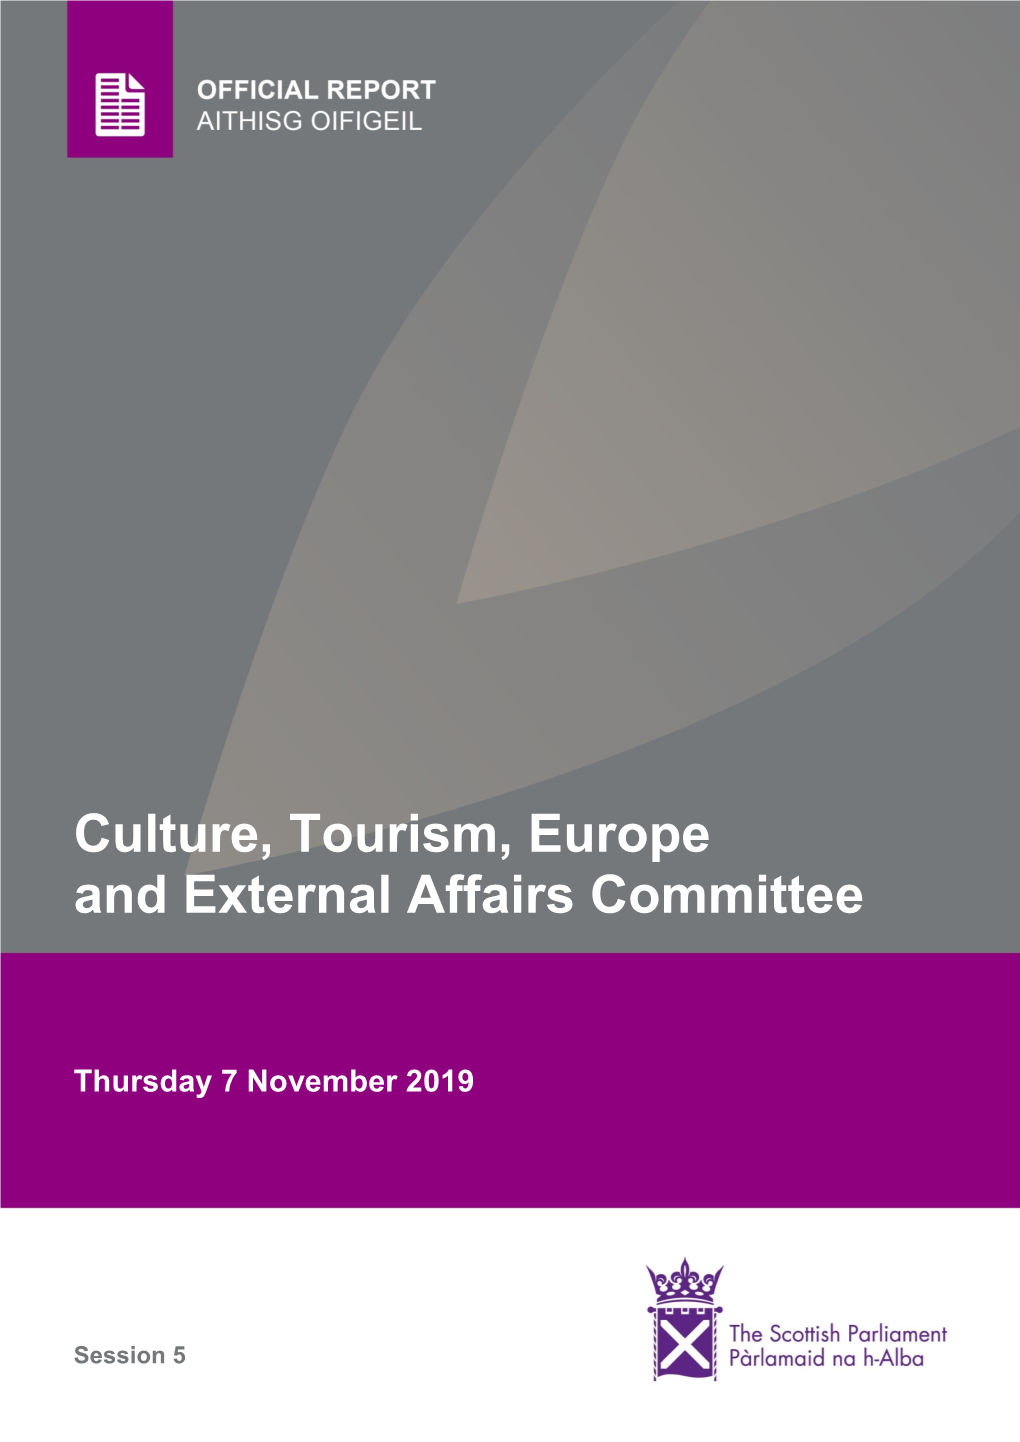 Culture, Tourism, Europe and External Affairs Committee